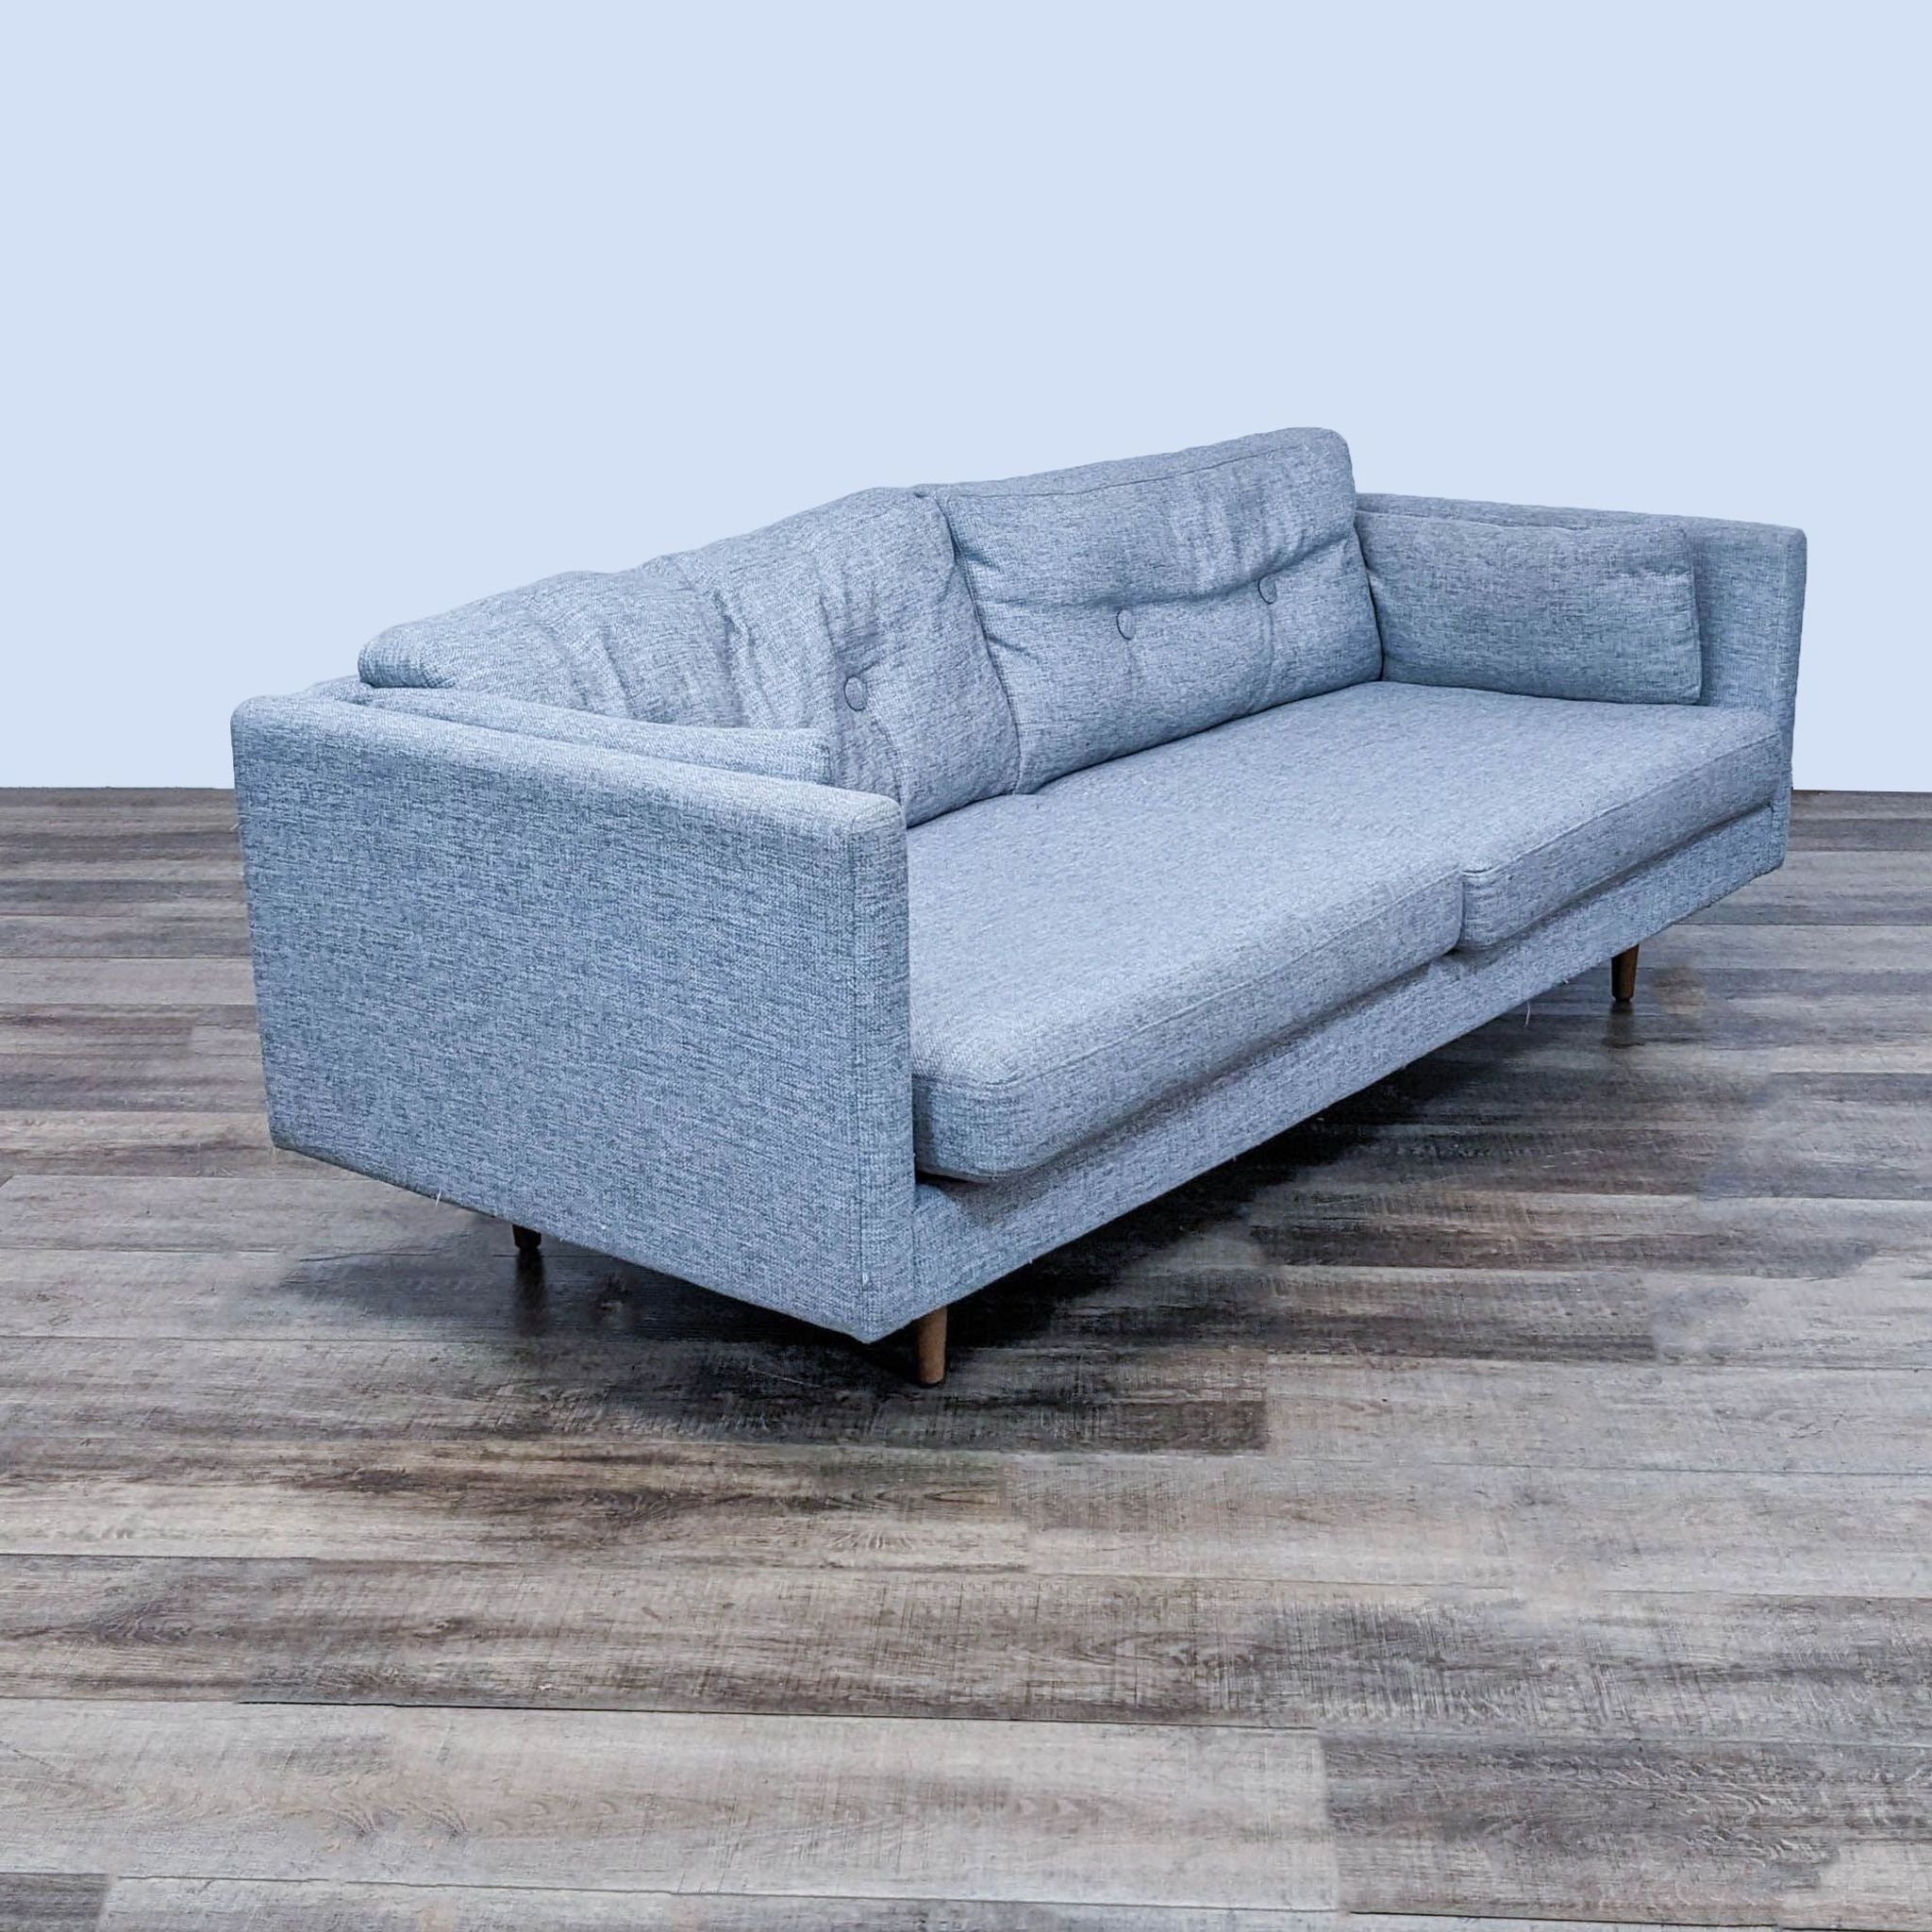 Alt text 2: An angled perspective of a gray 3-seat fabric sofa by Article with button-tufted backrest, two side accent pillows, narrow arms, and wooden walnut finished legs.